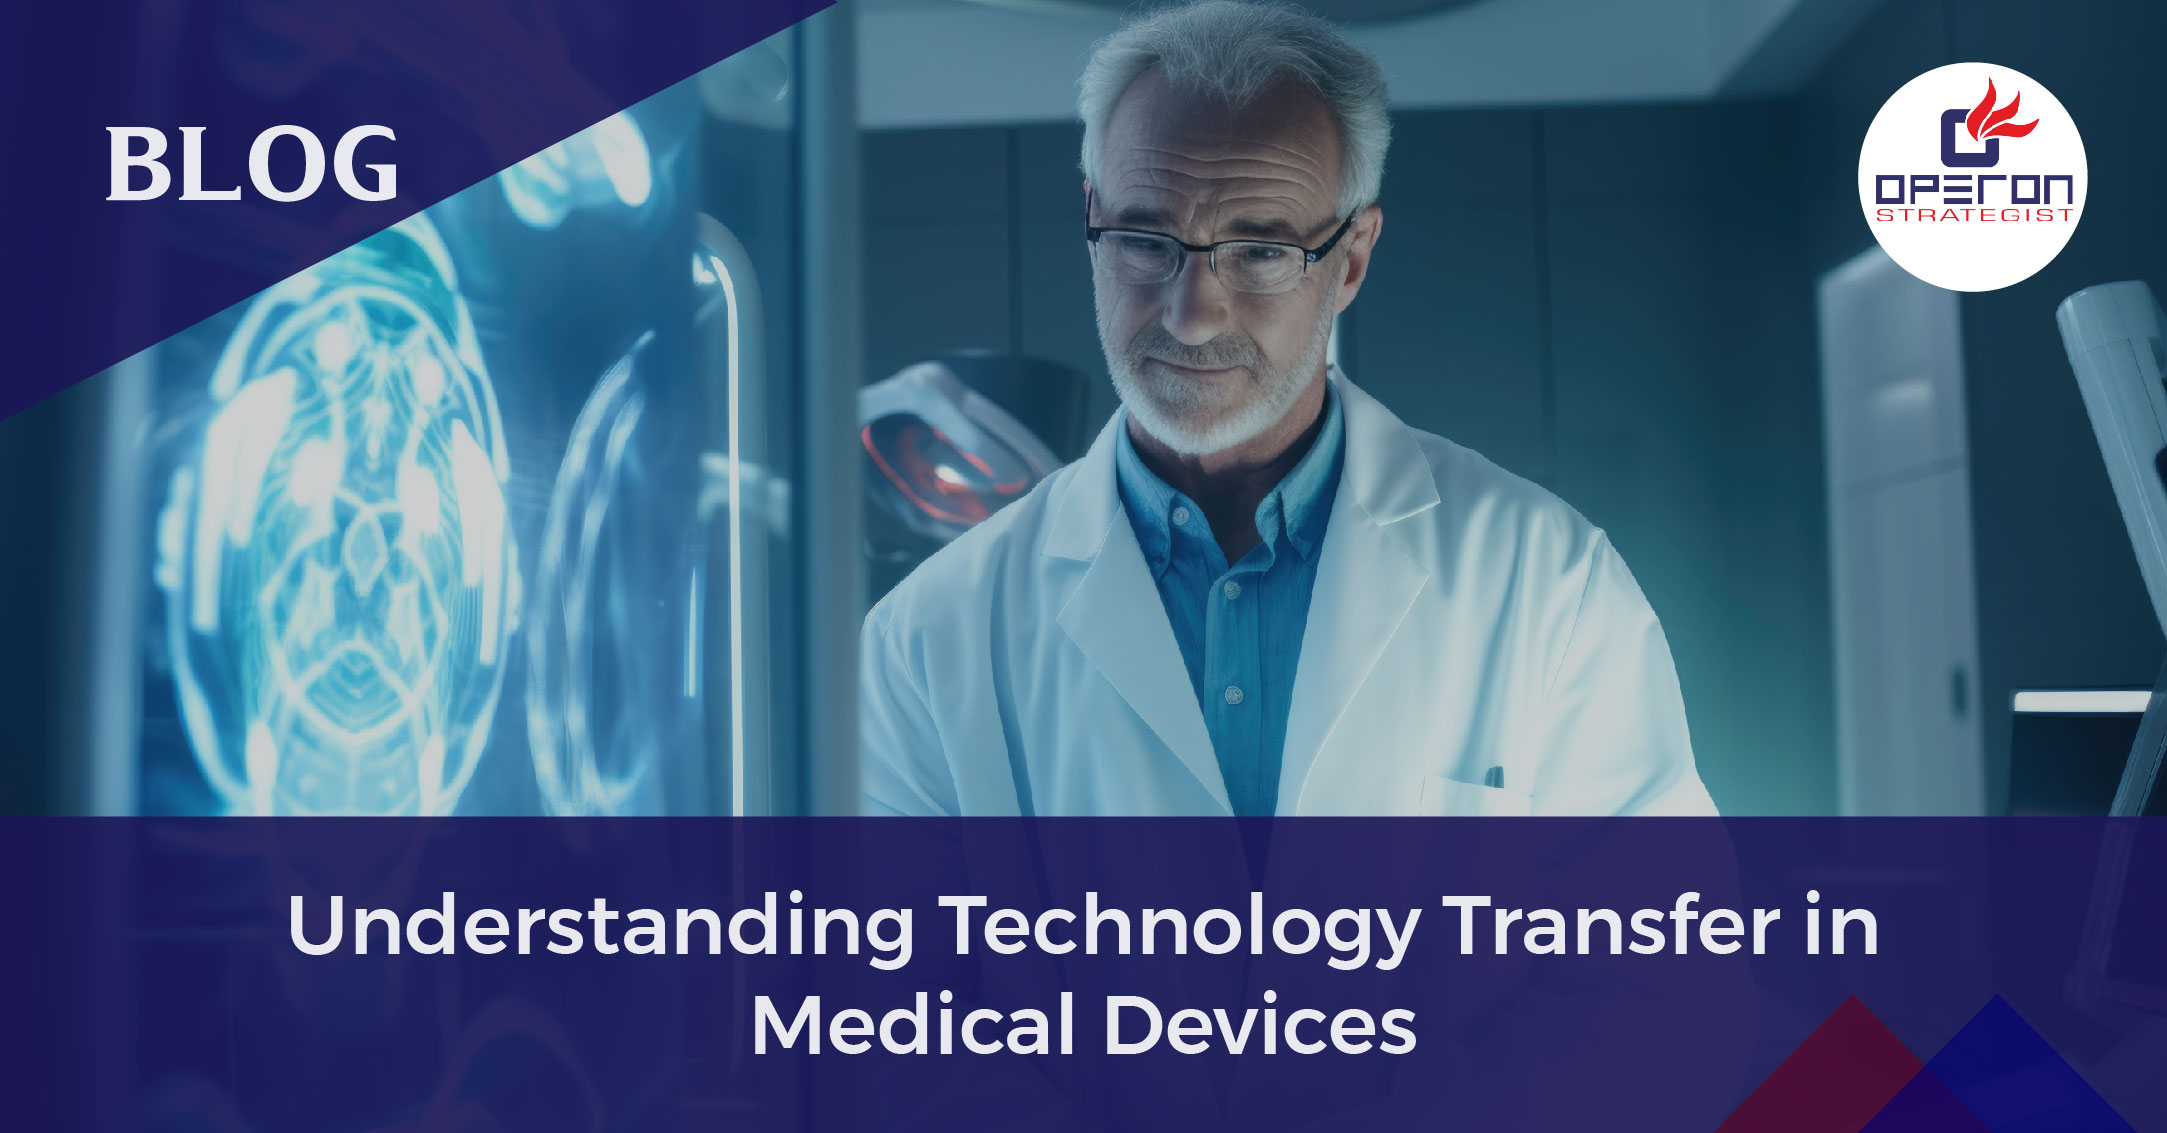 Technology Transfer in Medical Devices